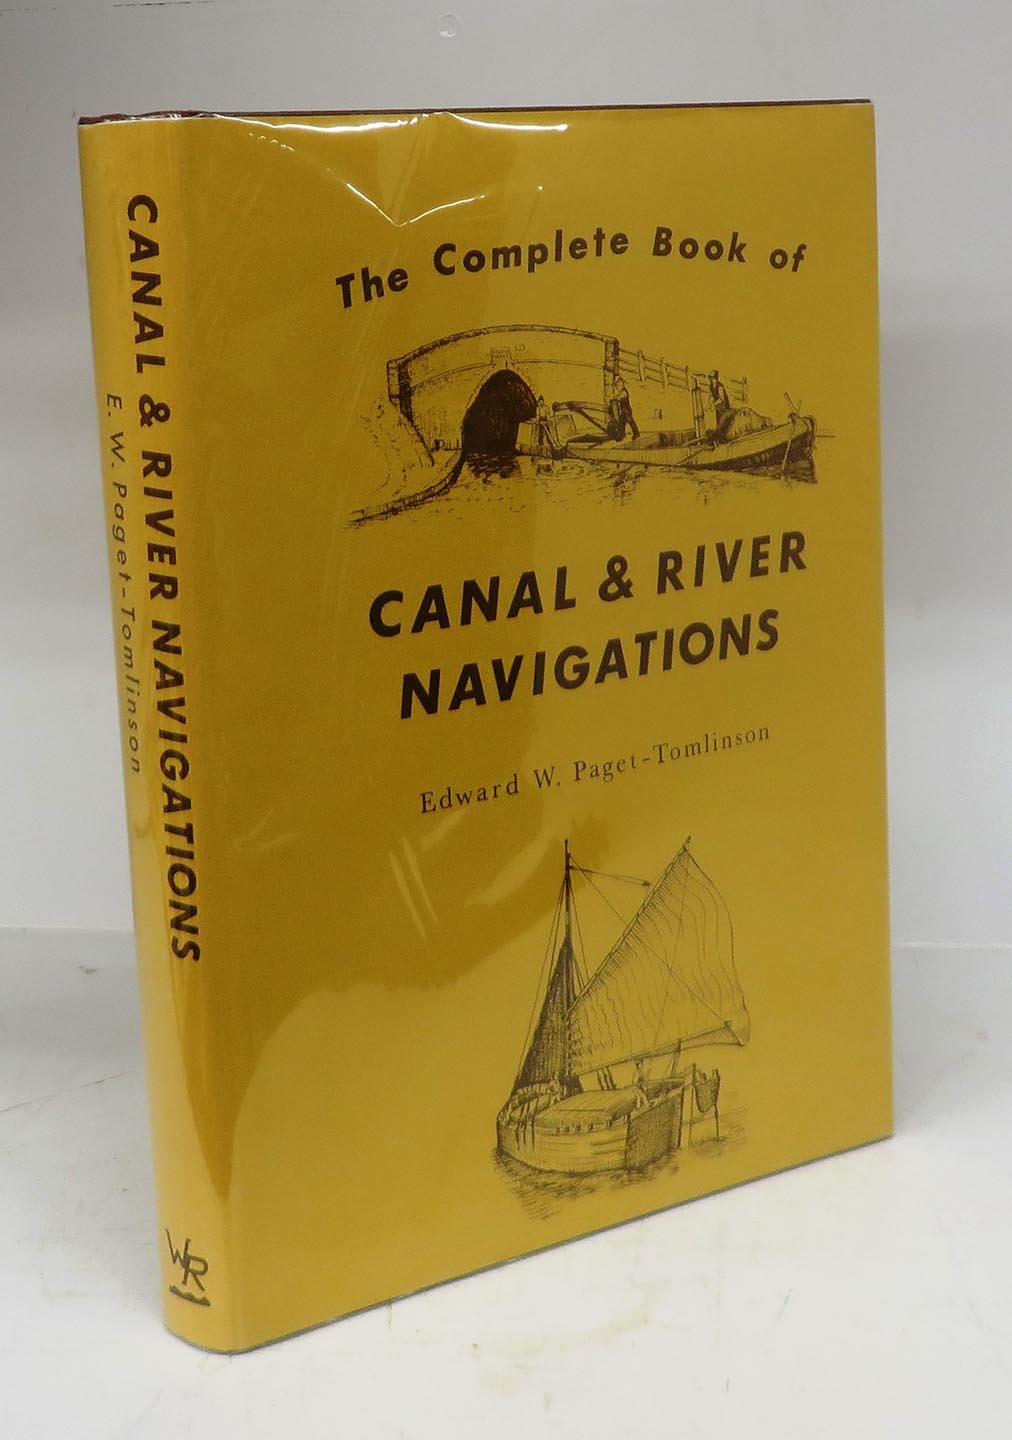 The Complete Book of Canal & River Navigations